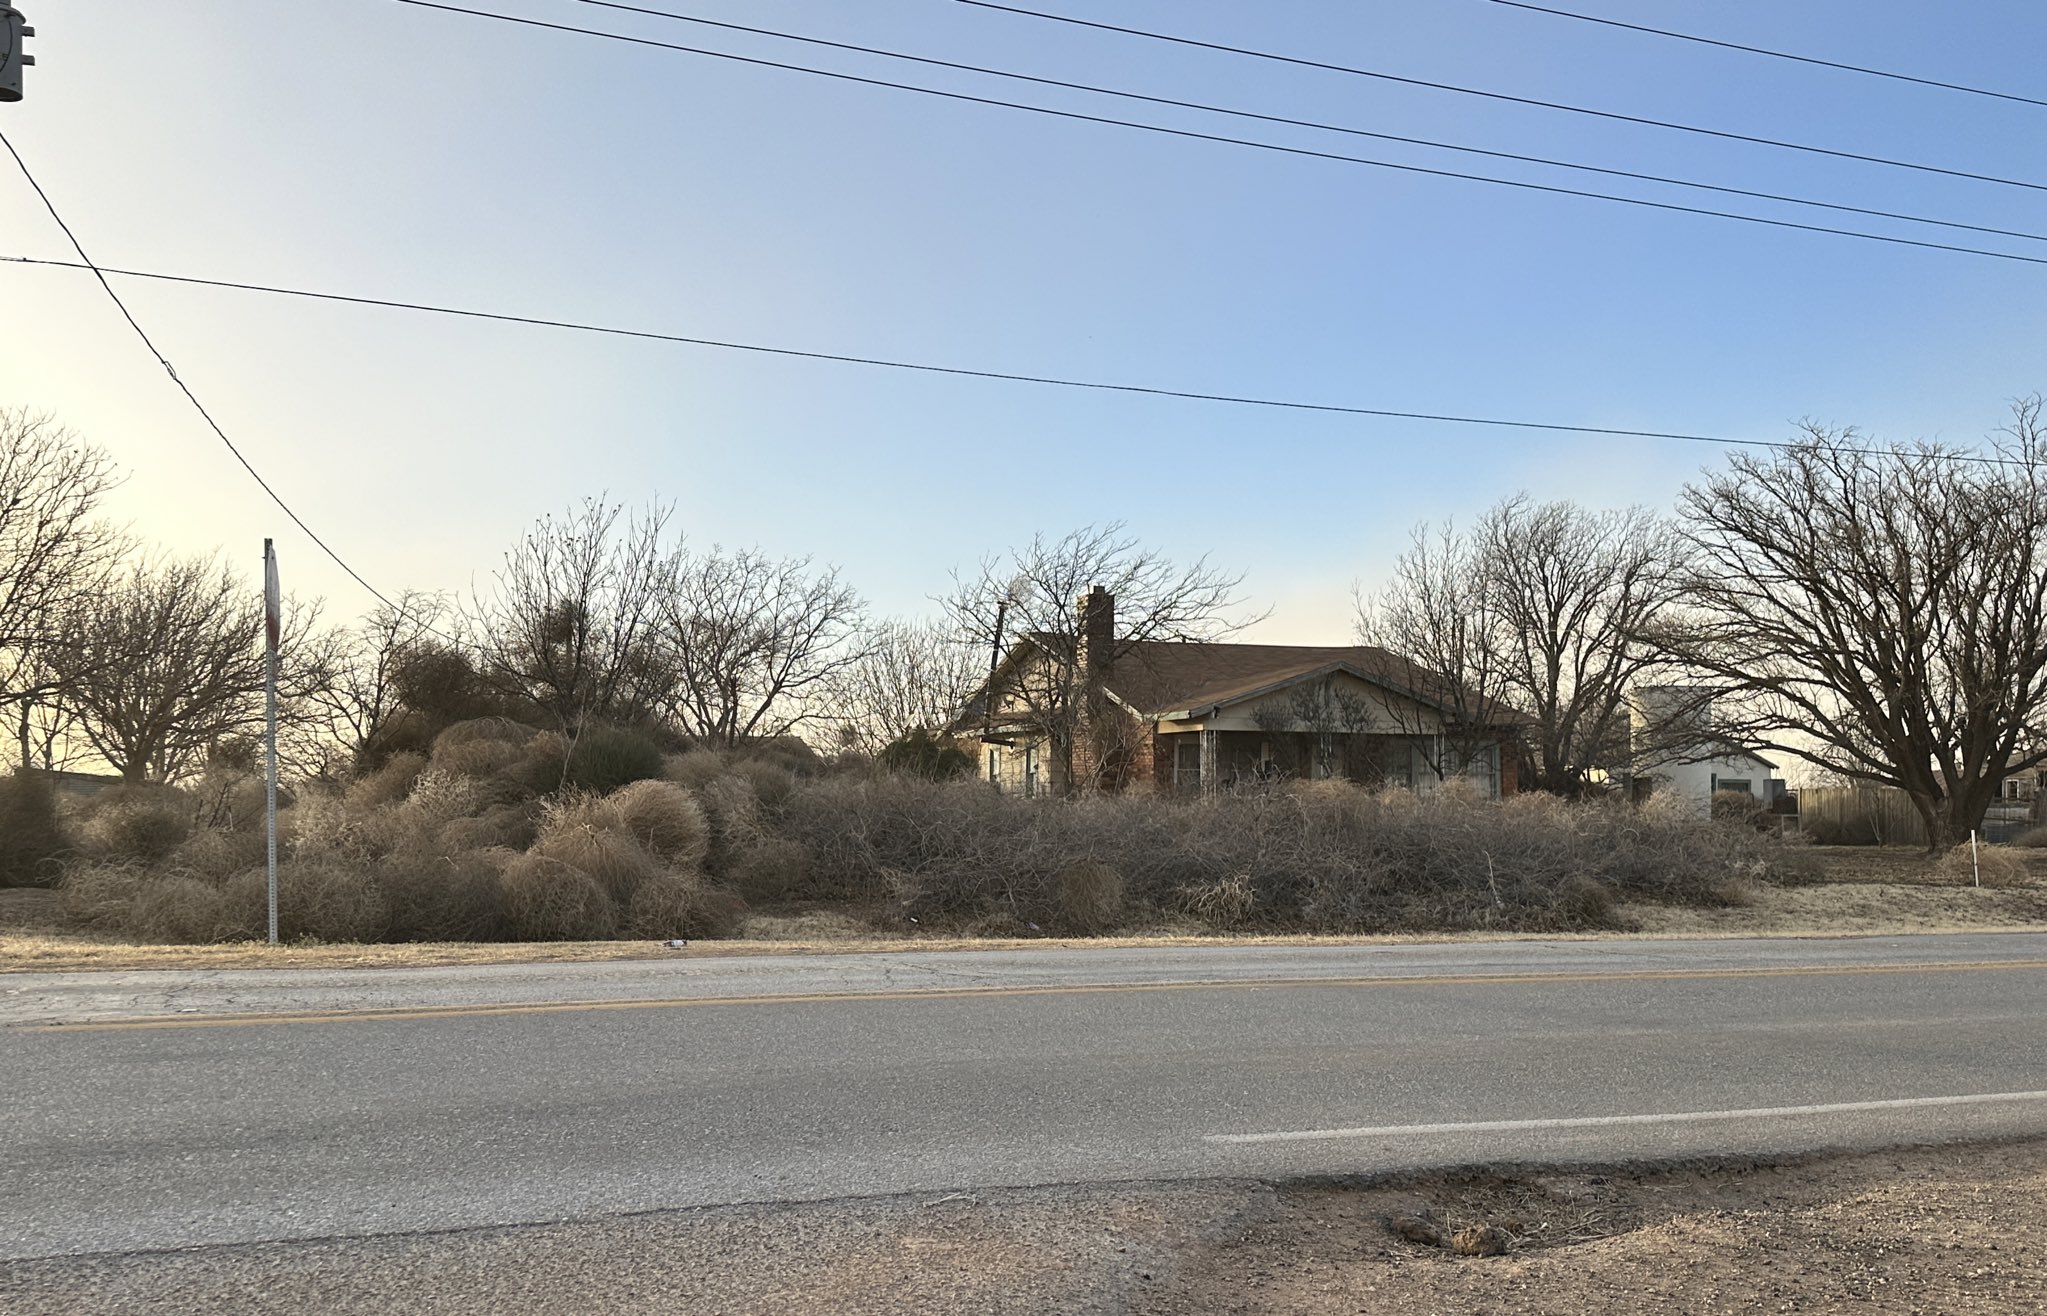 A "family" of tumbleweeds gathered around a homestead in early January 2023. The image is courtesy of Larry Rodriguez.